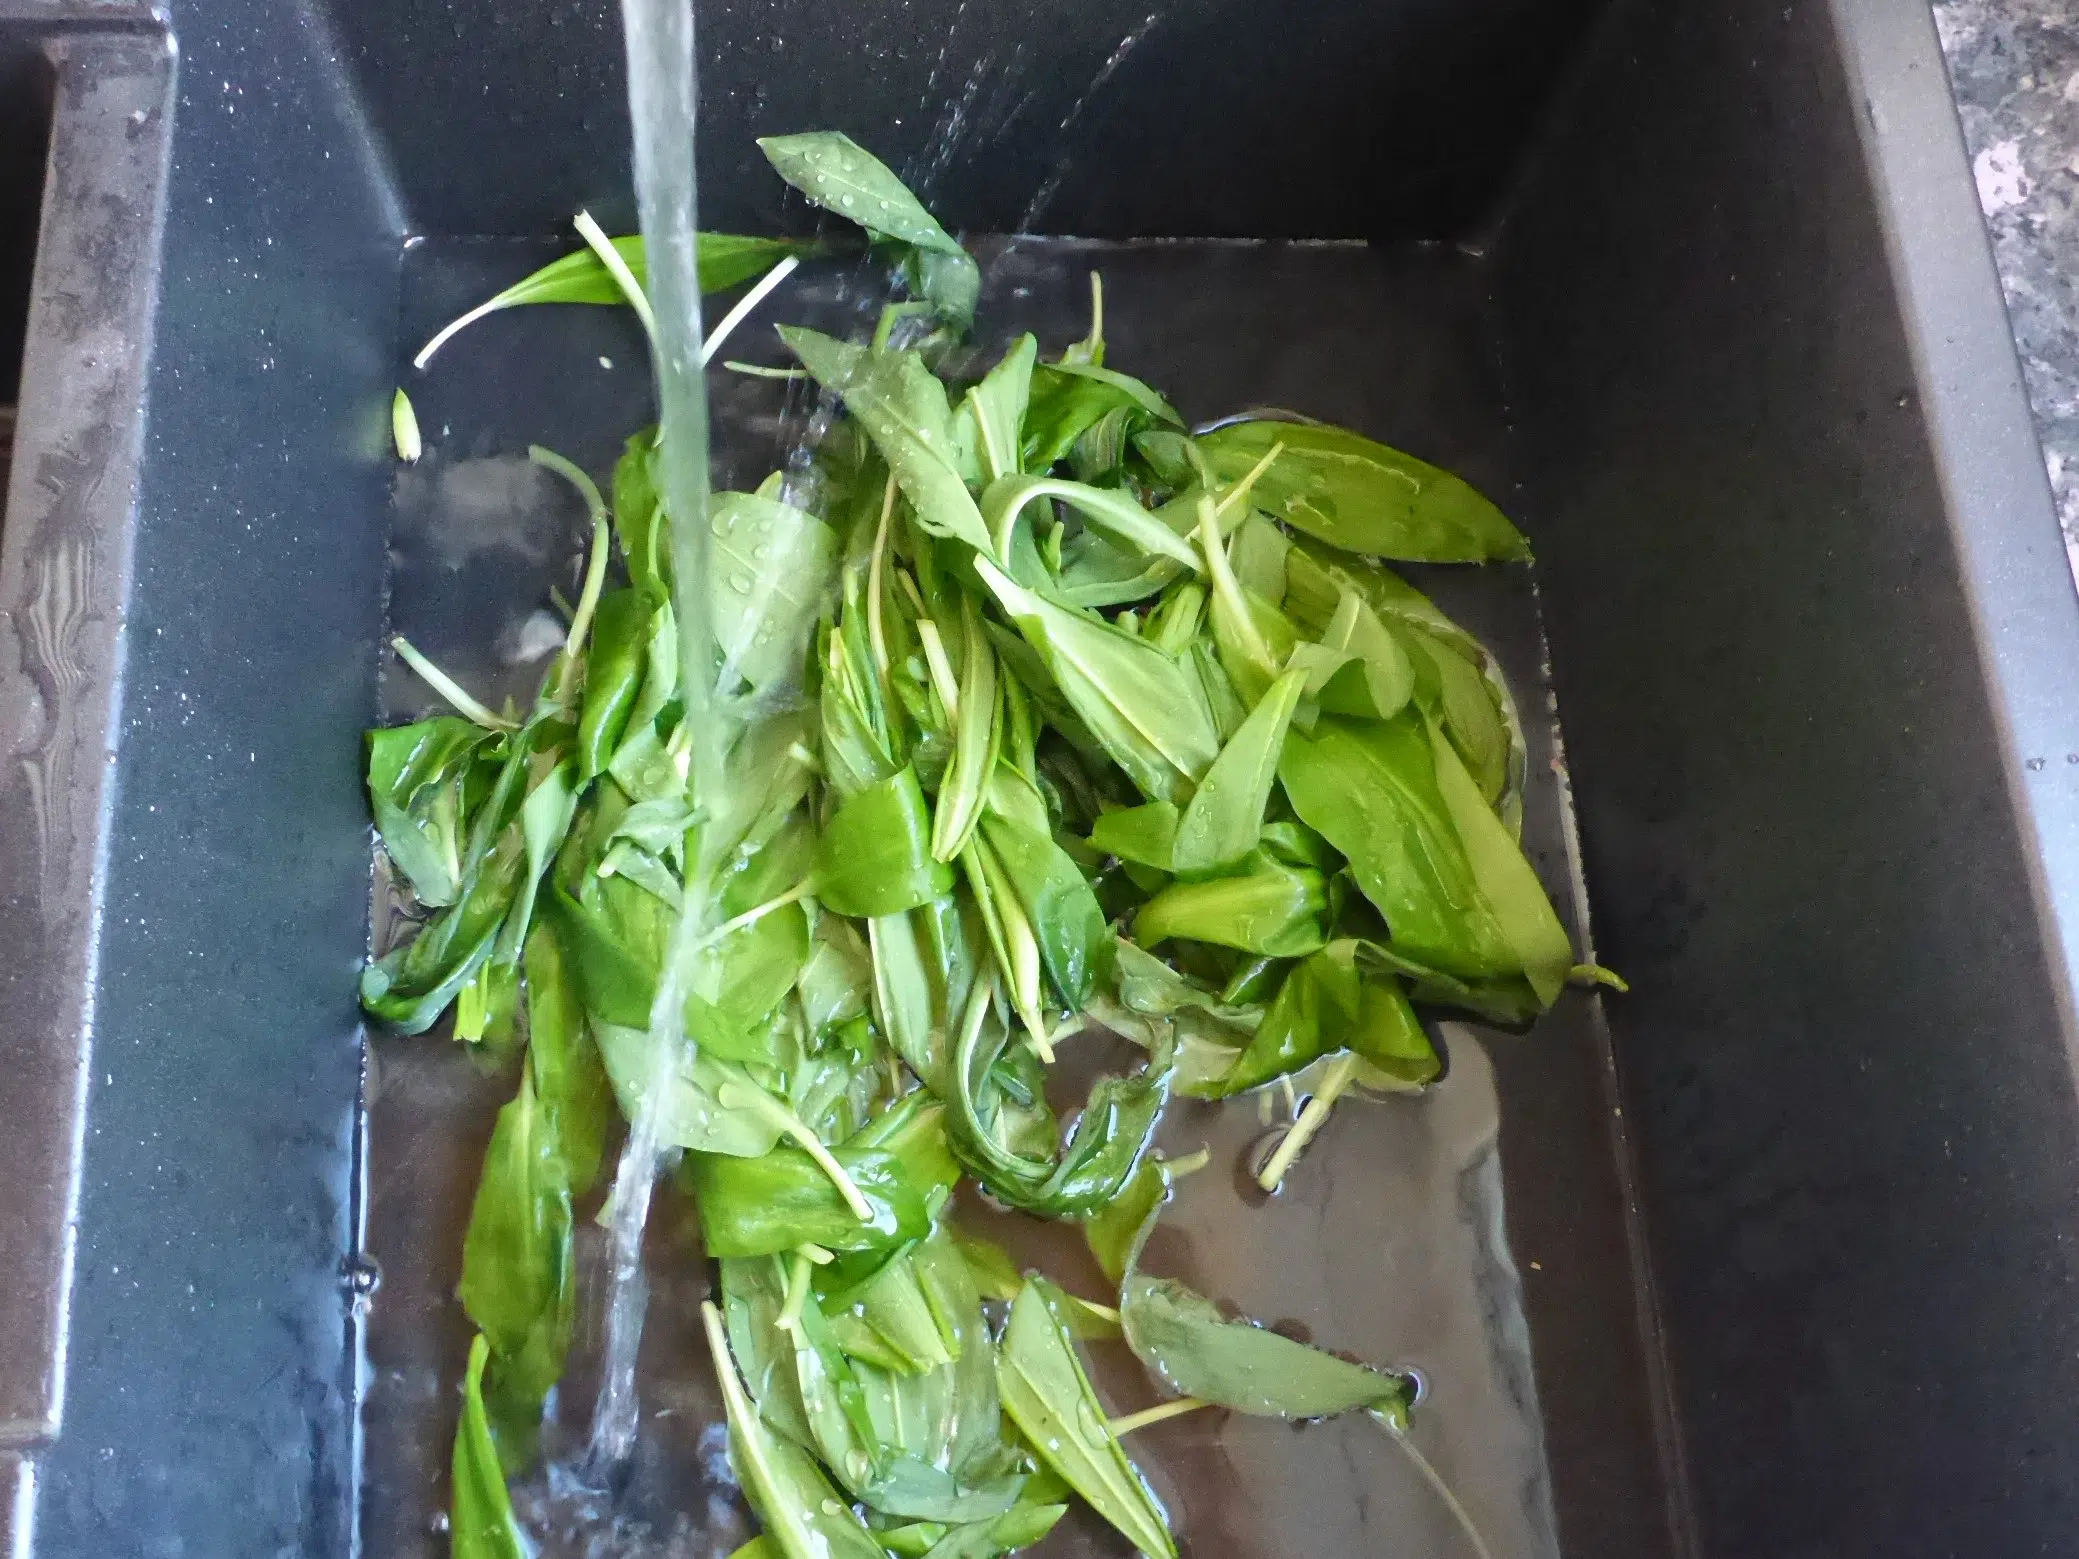 Cleaning Fresh Wild Garlic Leaves in a Sink with Water, Preparing for Use in making wild garlic bread recipe.